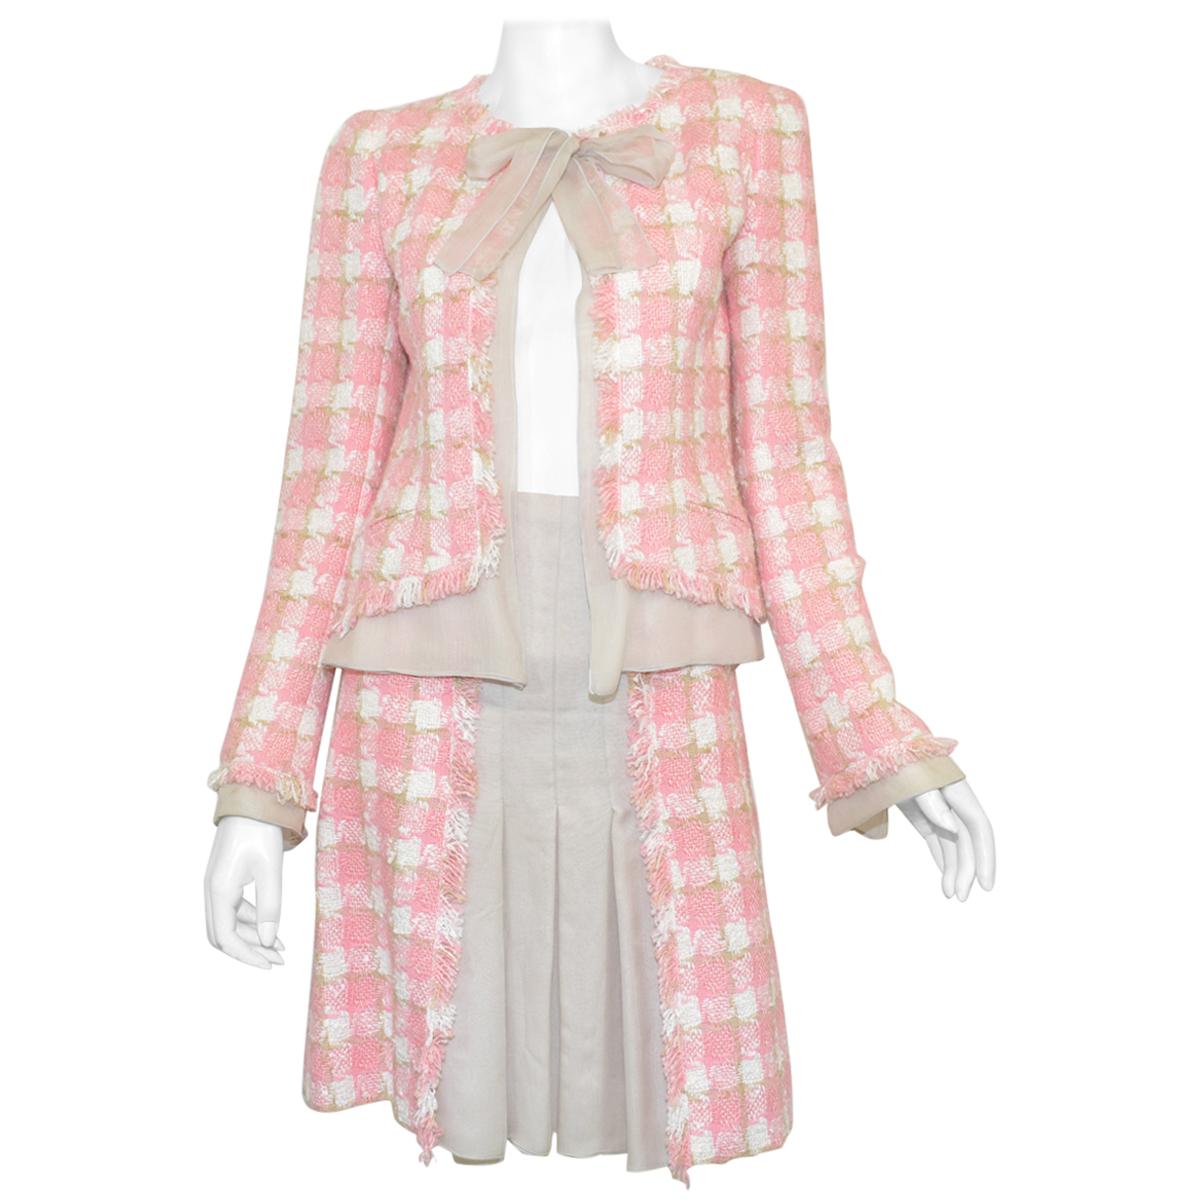 Chanel Pink, Beige Tweed Knit Skirt and Jacket Set with Chiffon